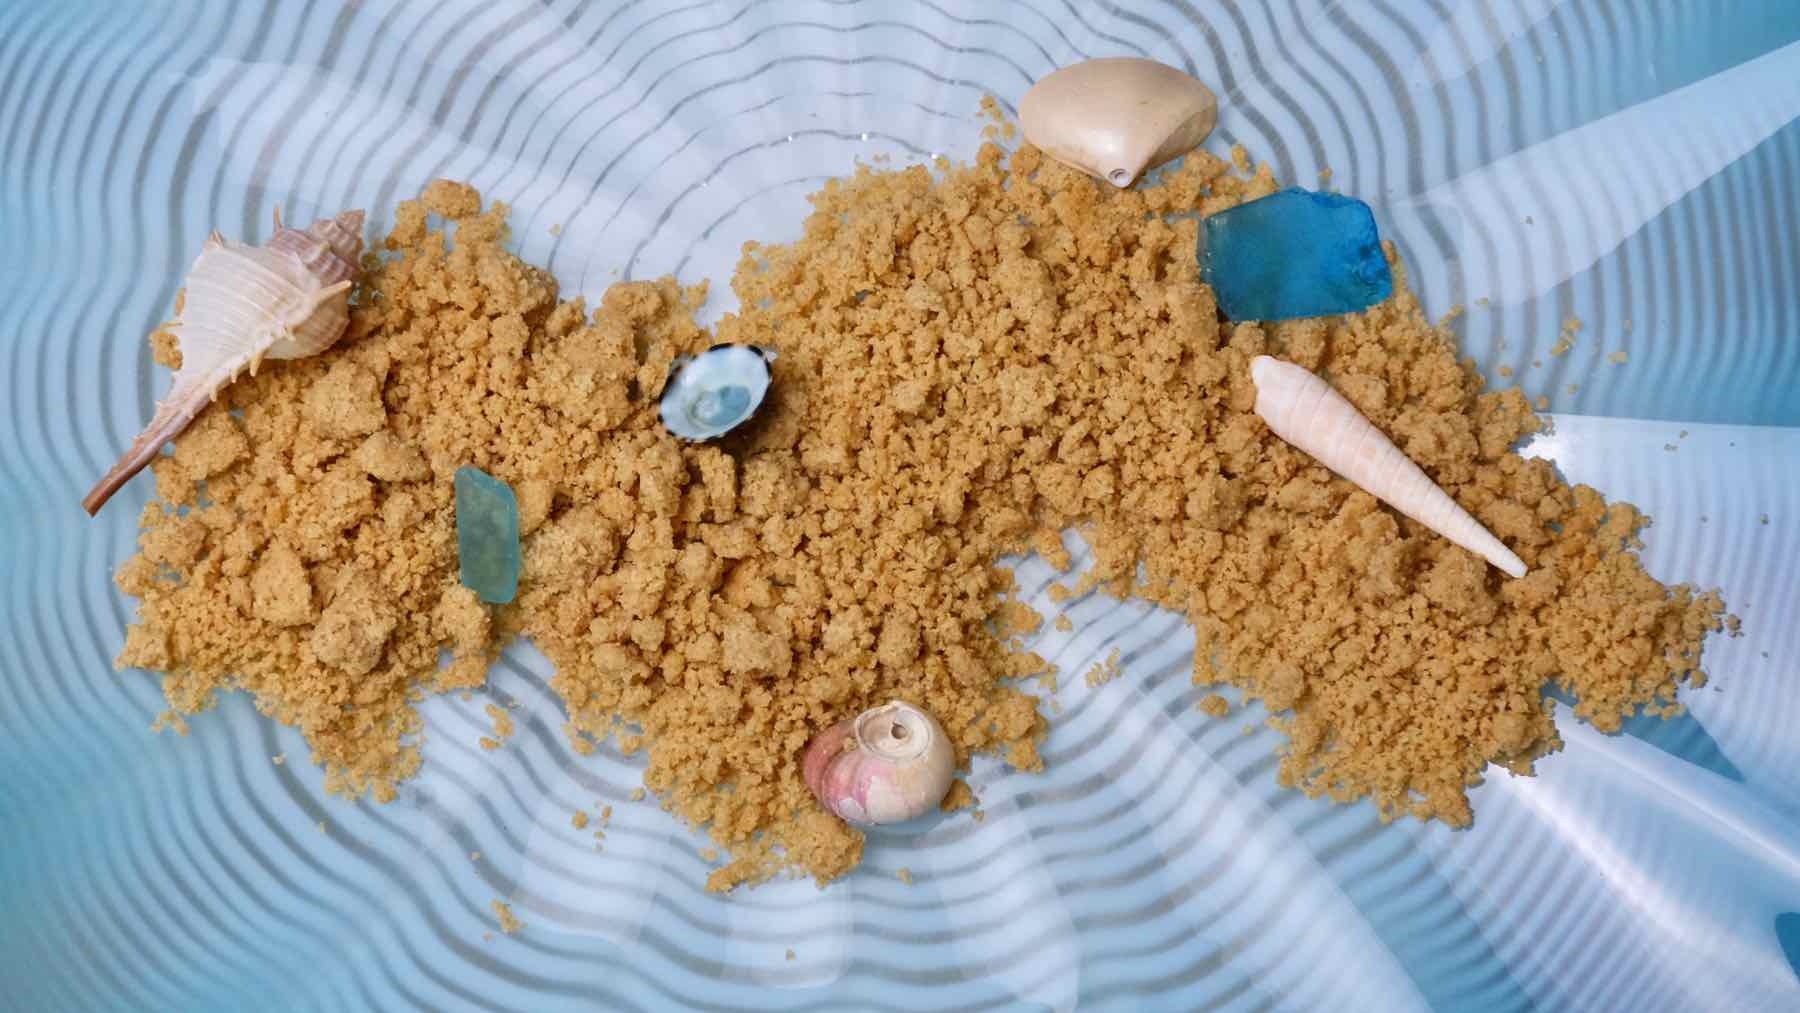 Easy Edible Sand scattered across a blue wavy dish and garnished with sea glass and shells.